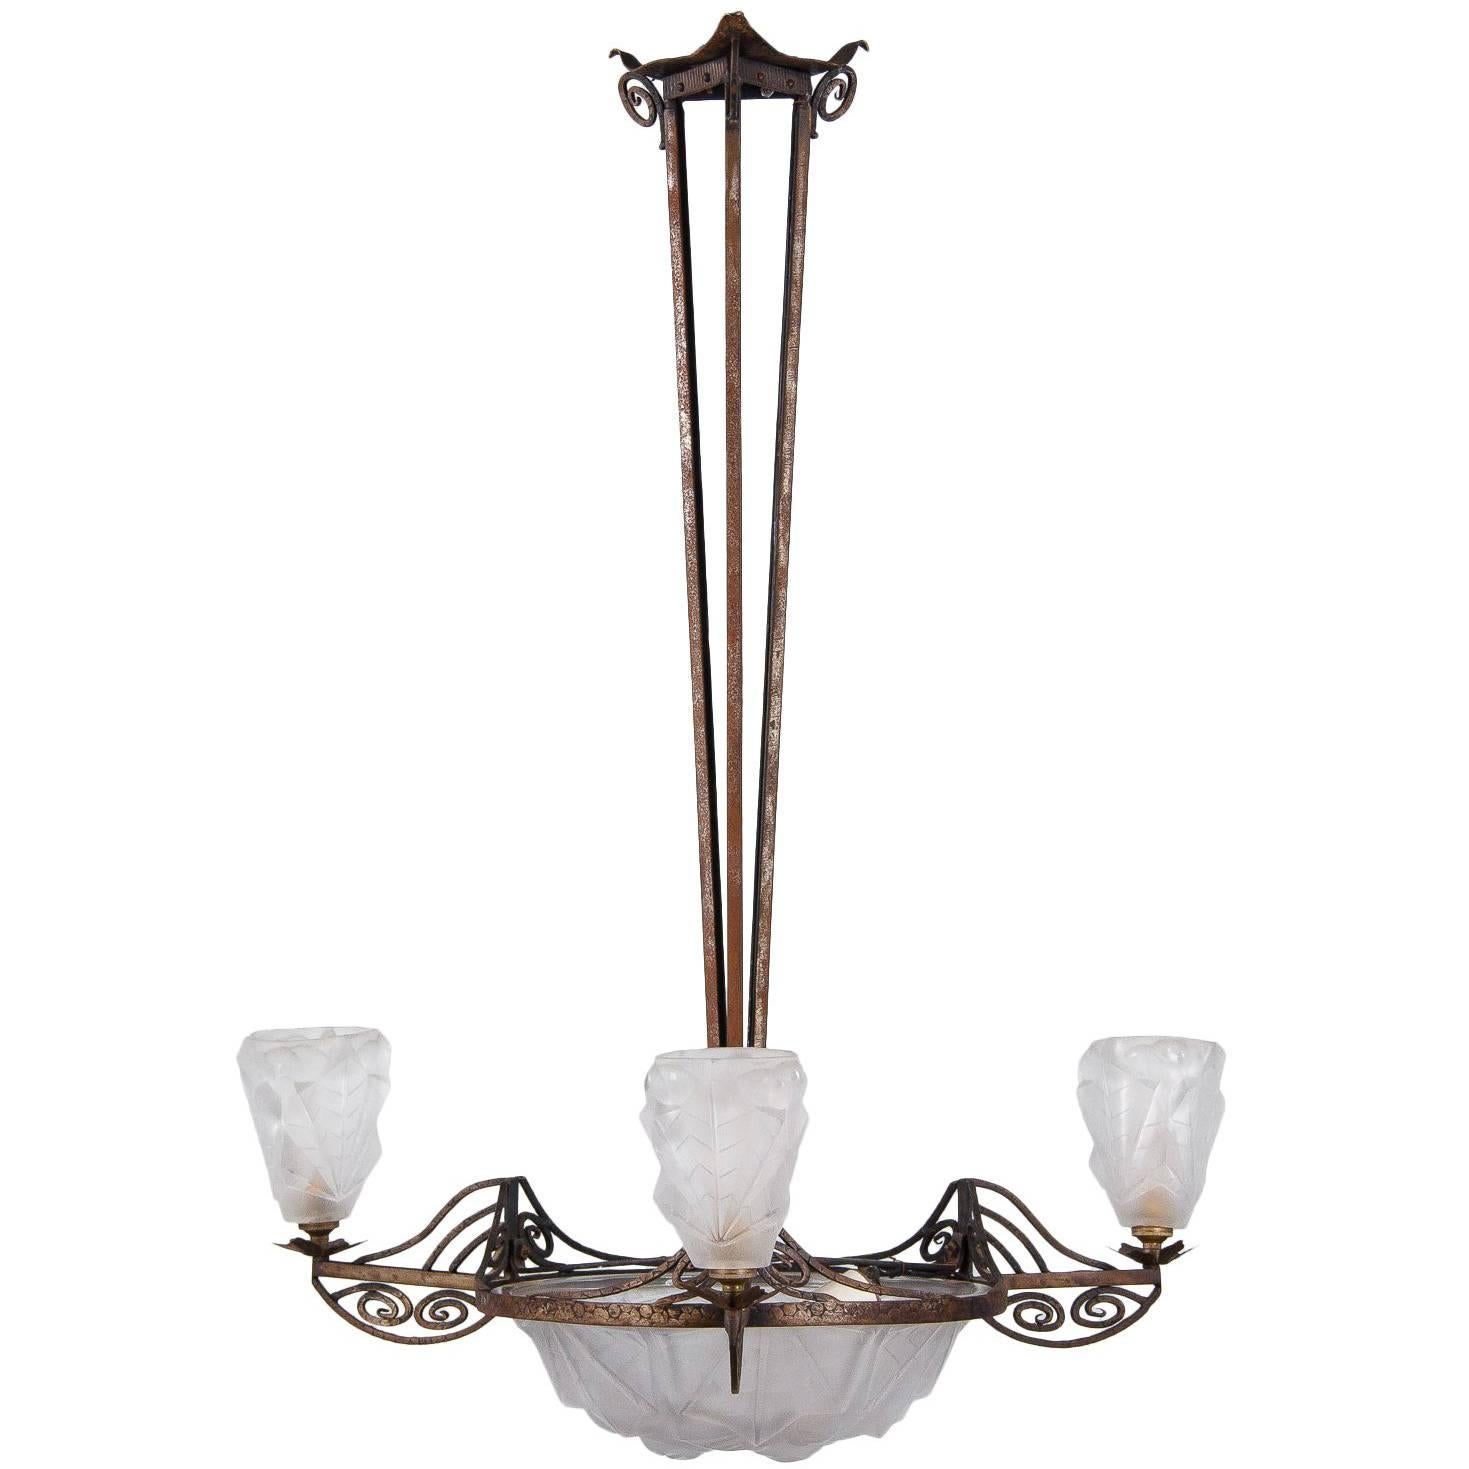 French Art Deco Chandelier Signed Degue, 1930s, Art